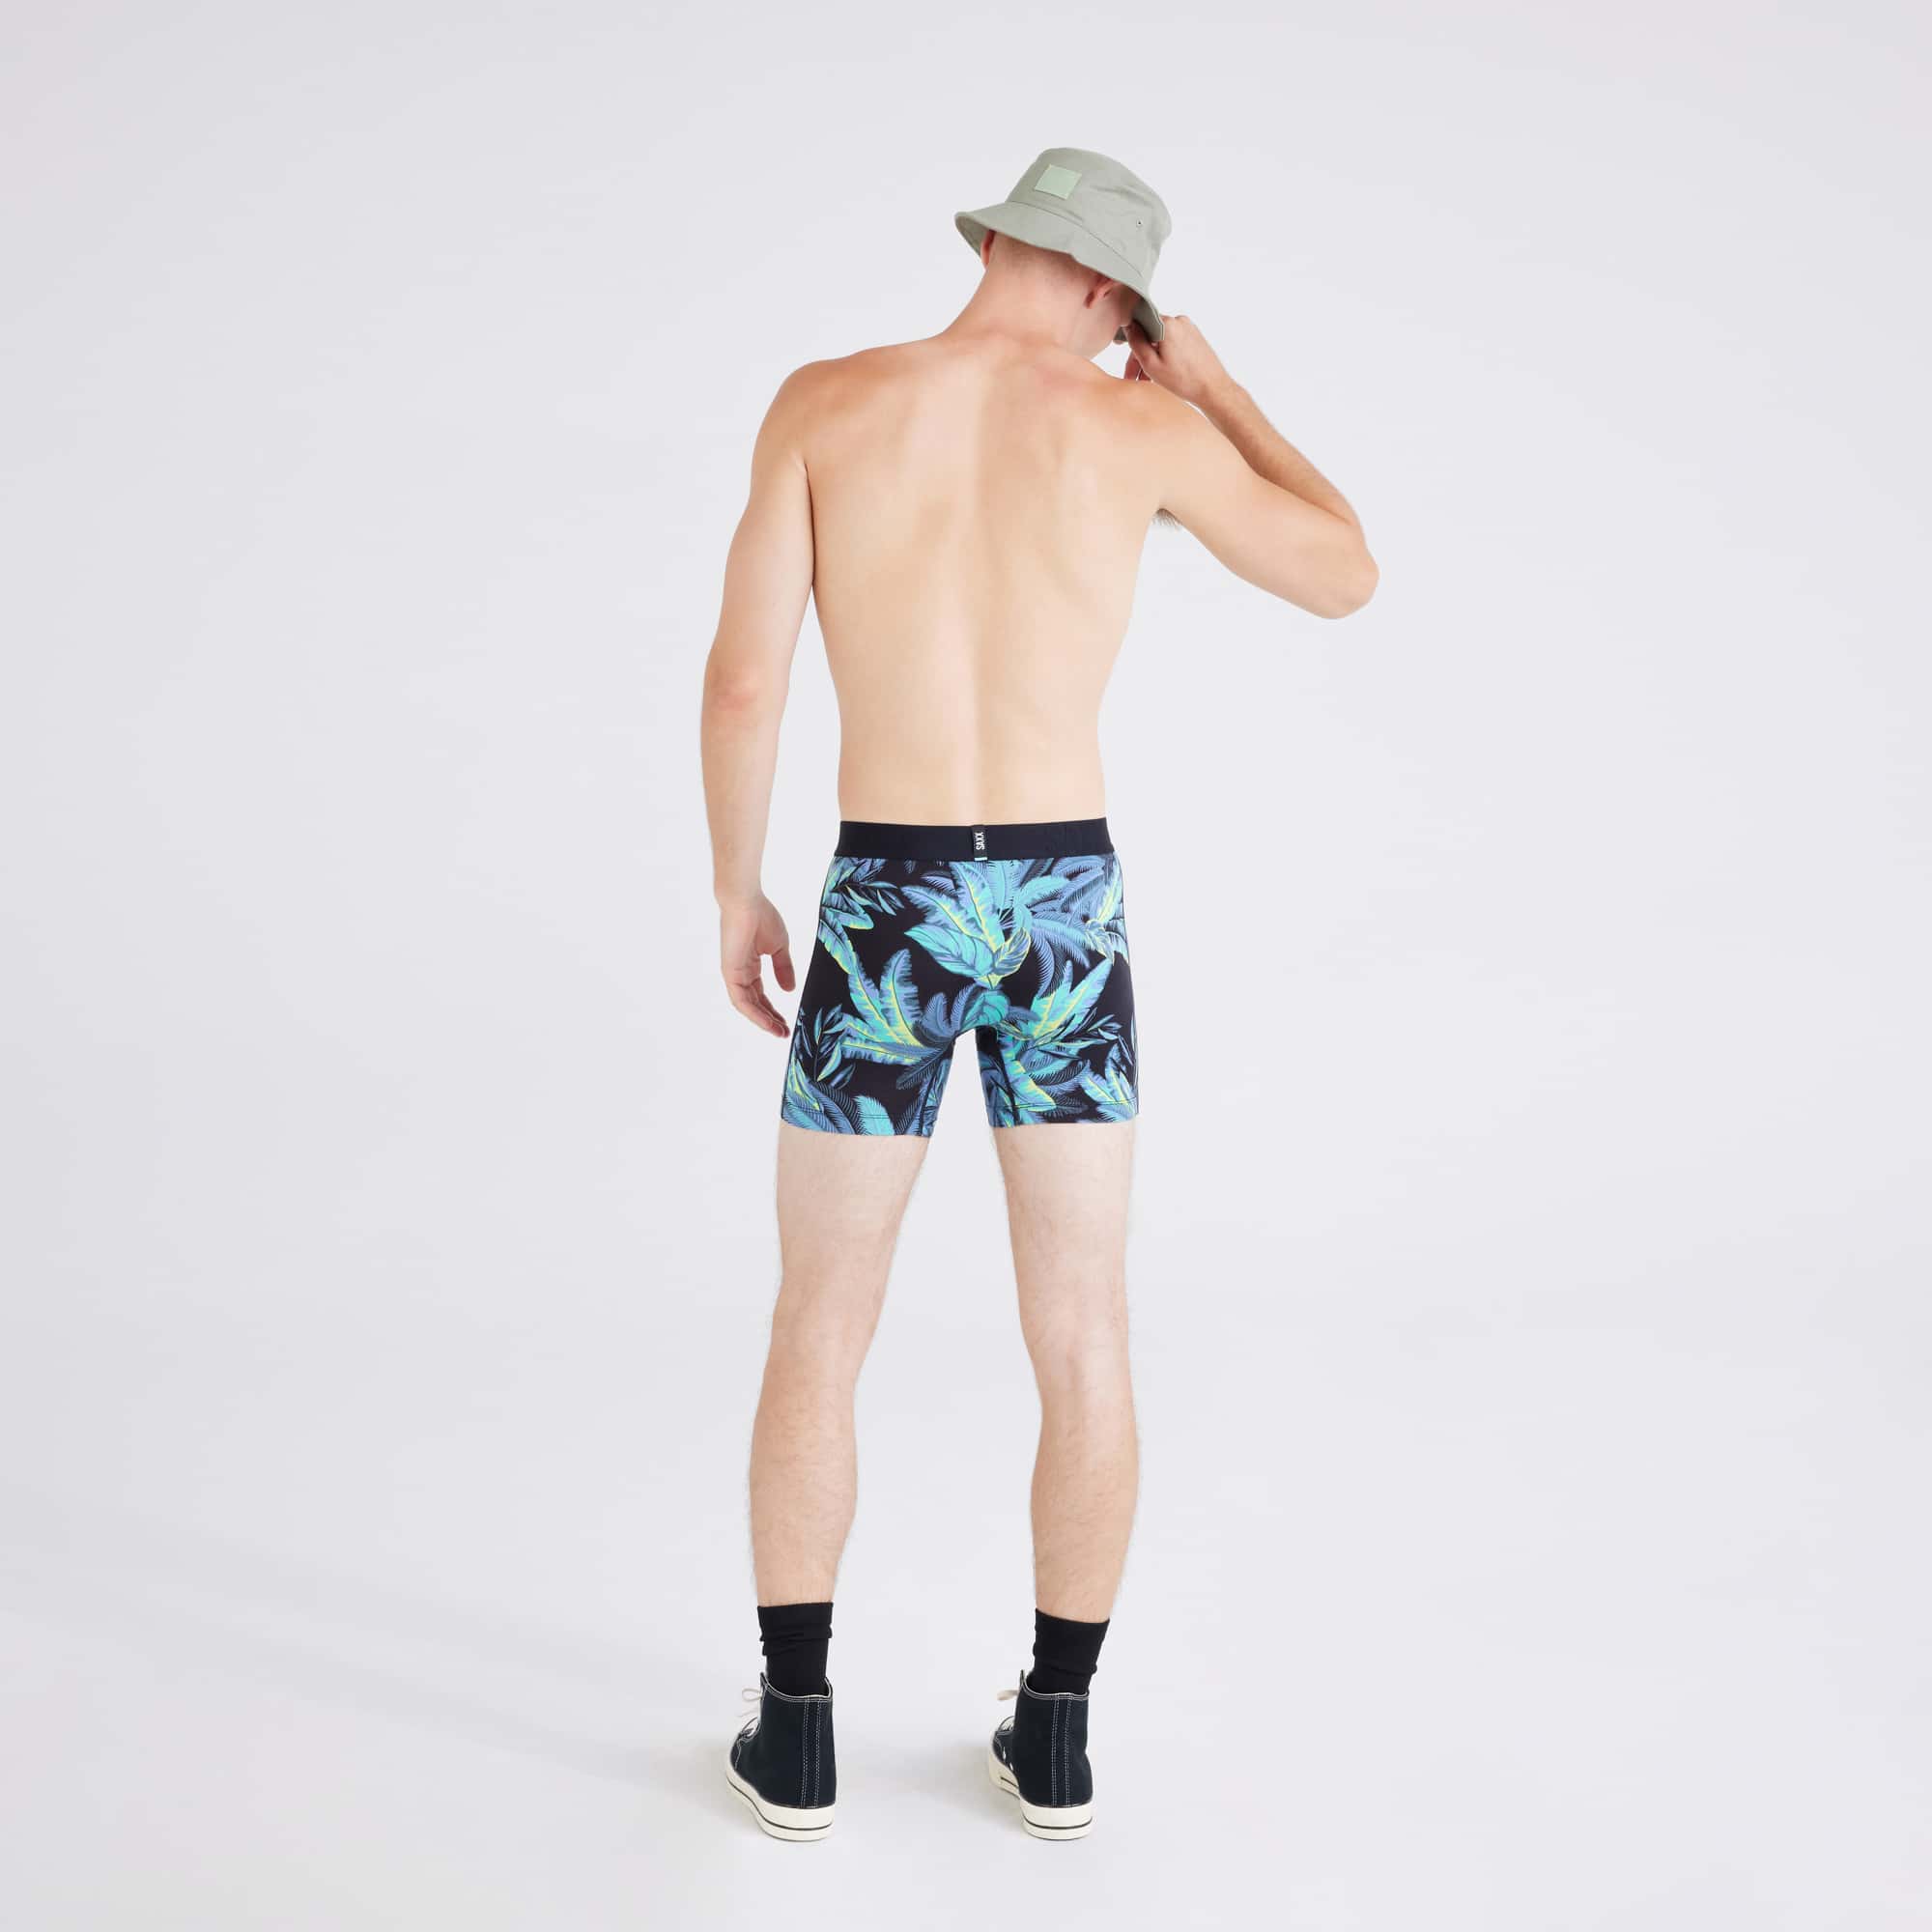 Back - Model wearing Droptemp® Cooling Cotton Boxer Brief in Tropical Jungle-Blue